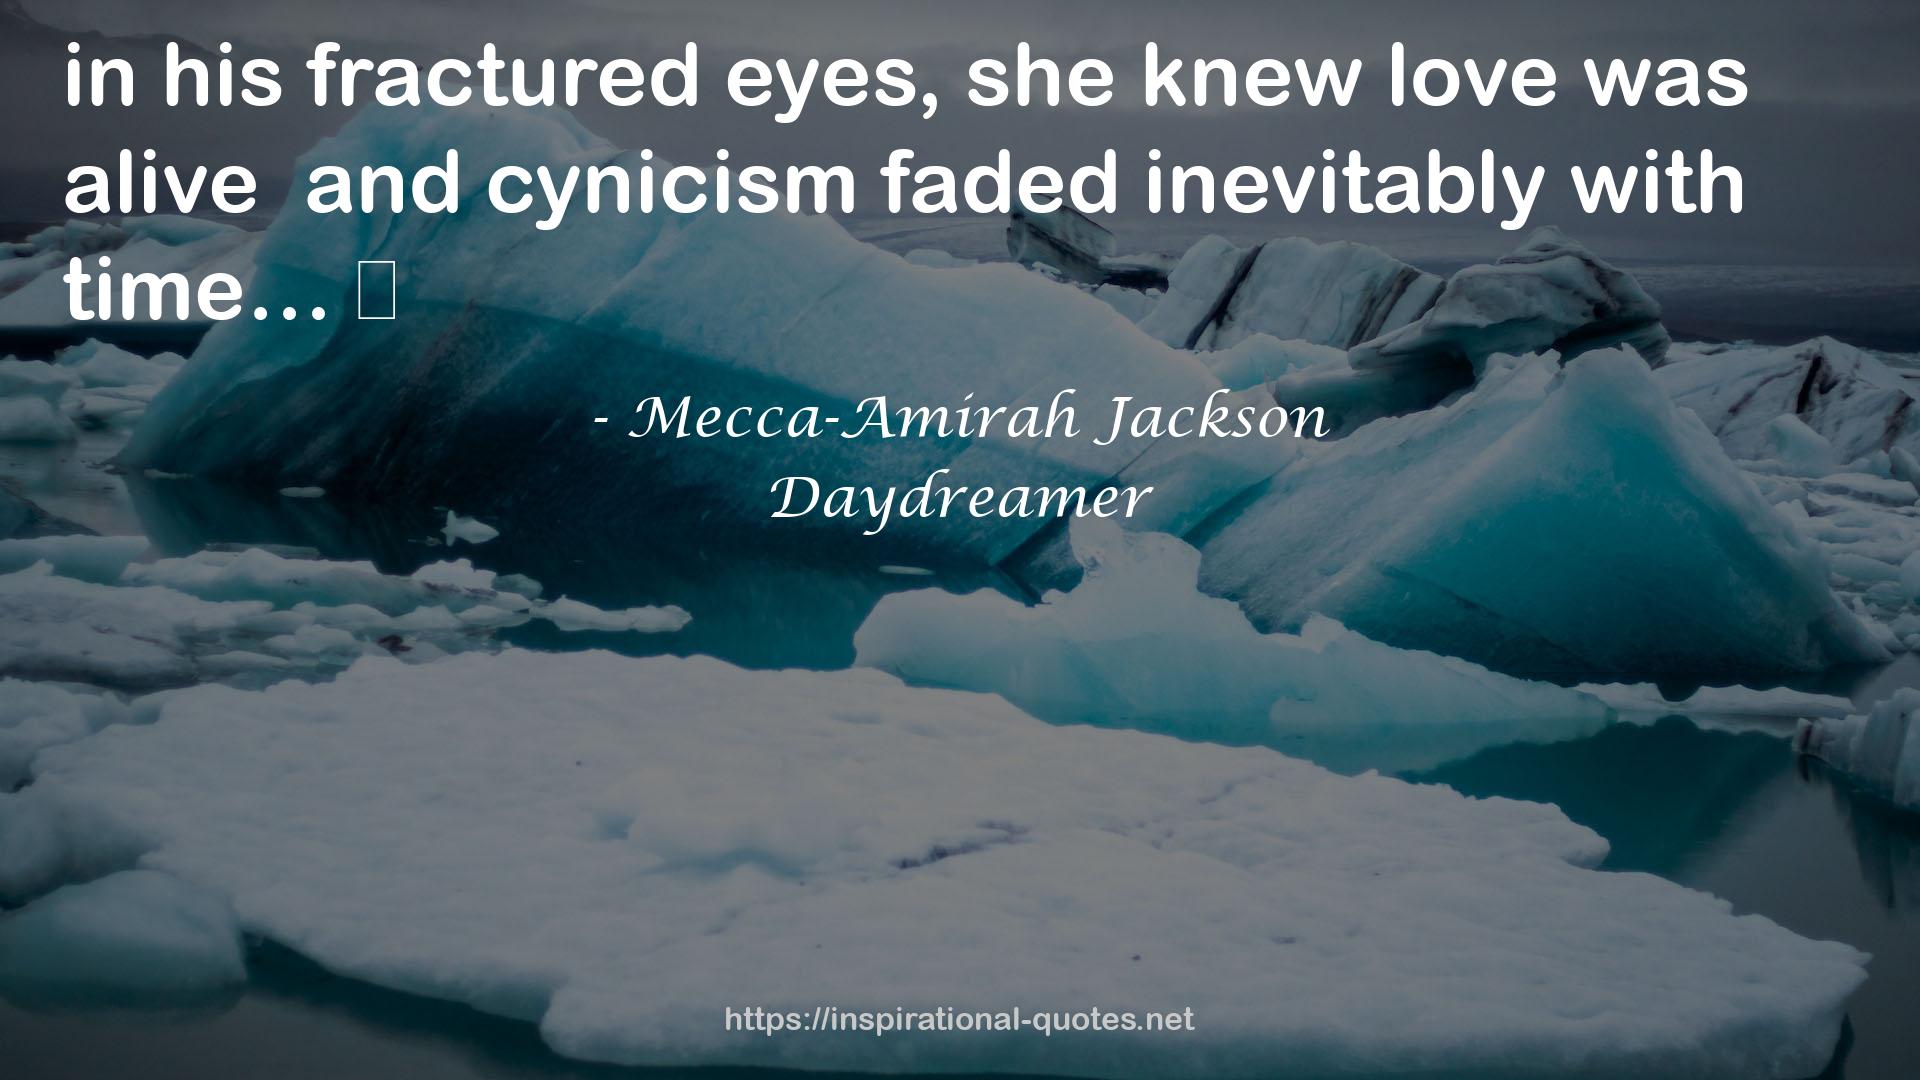 Daydreamer QUOTES